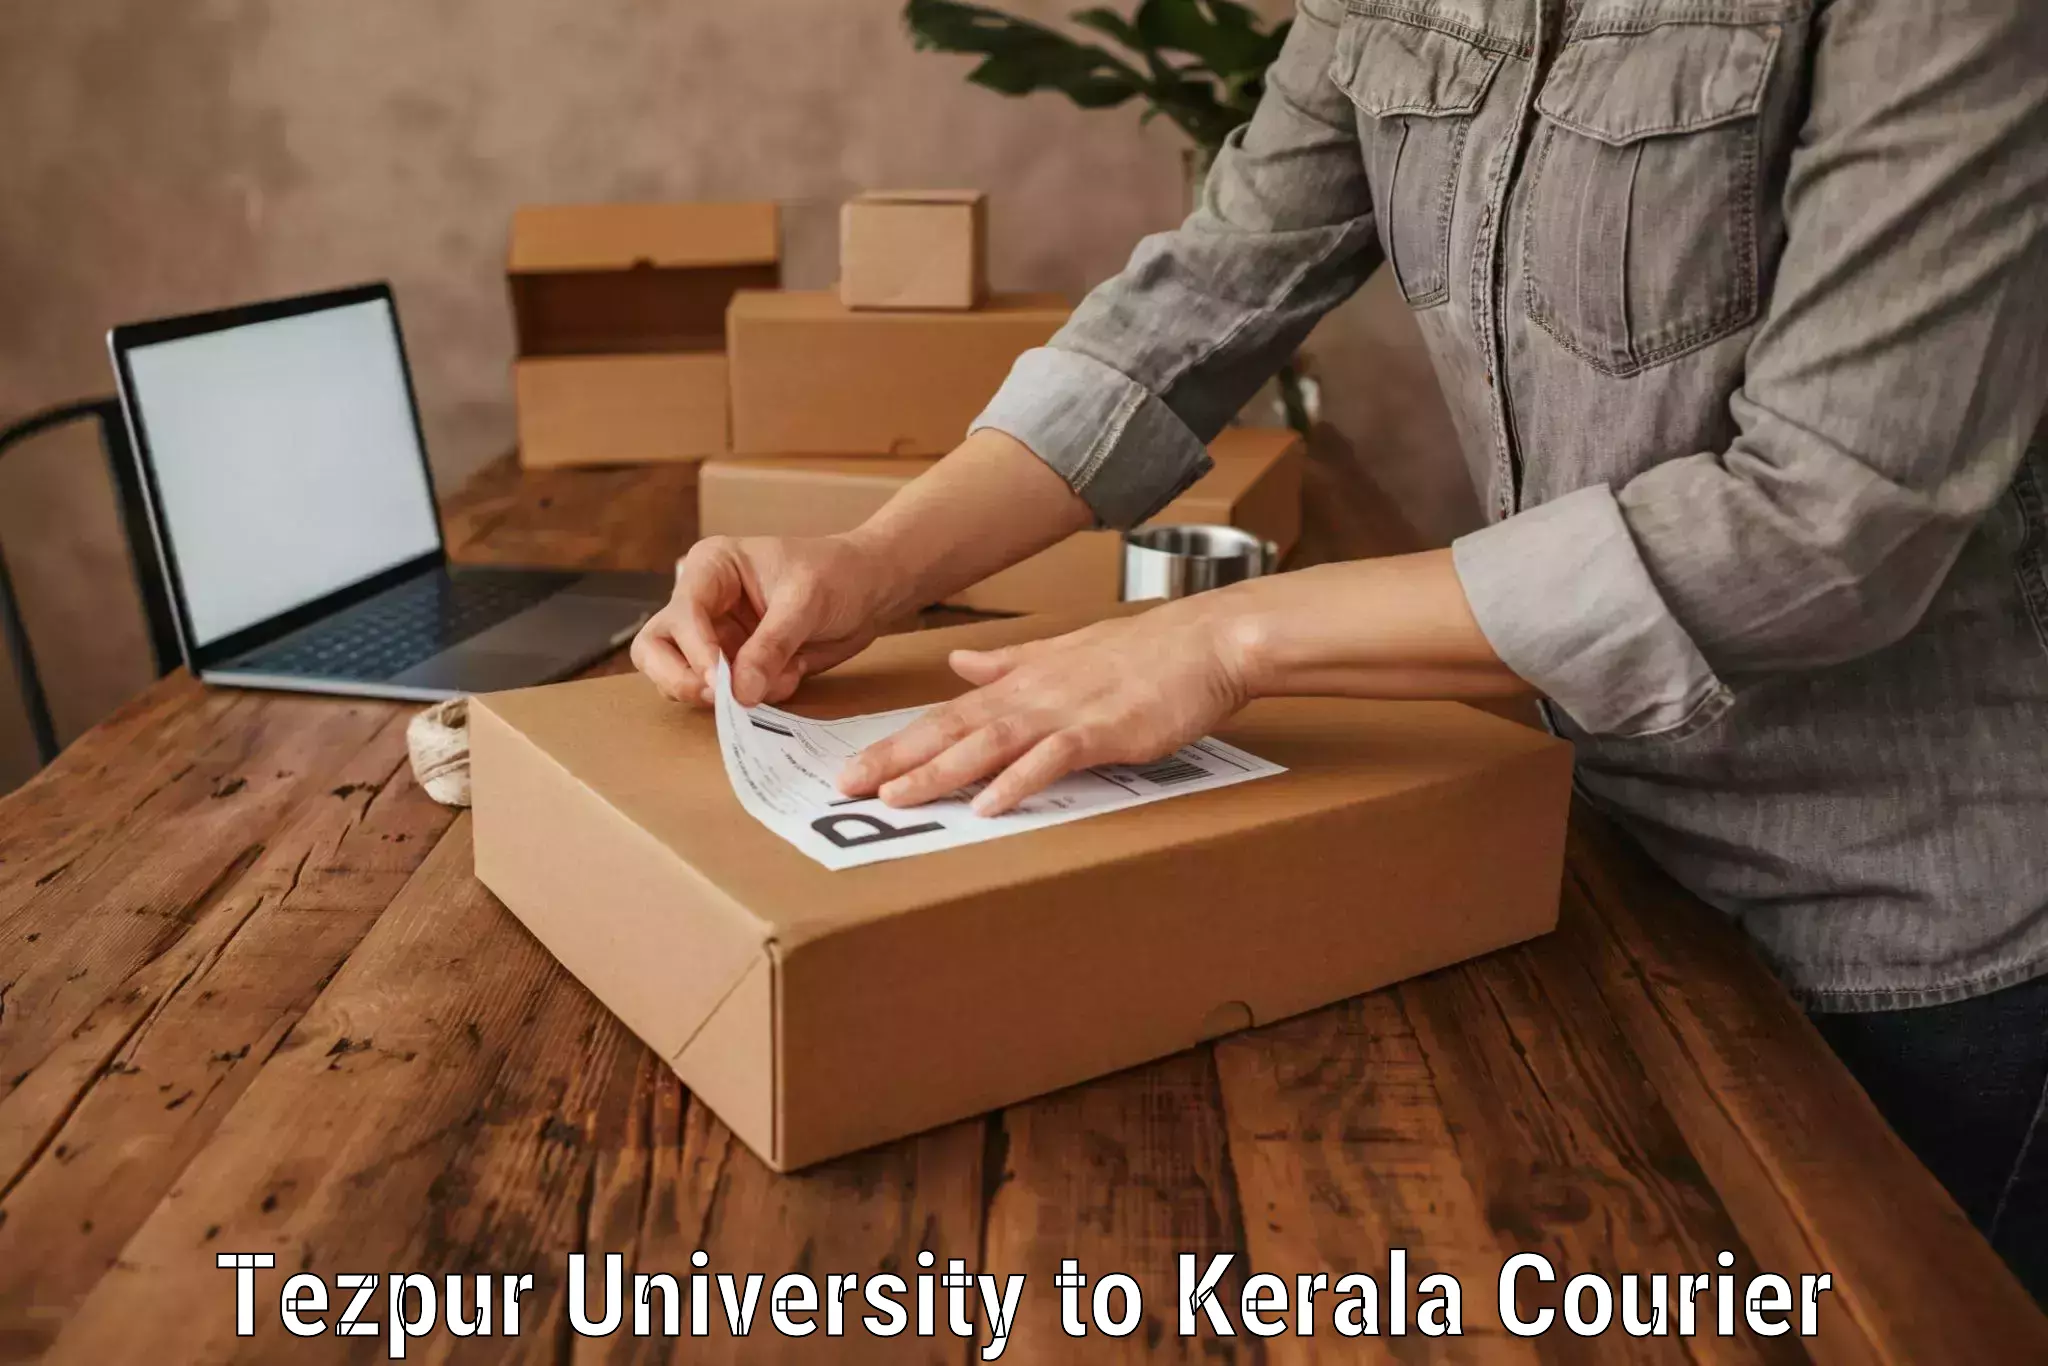 Reliable baggage delivery in Tezpur University to Kattappana